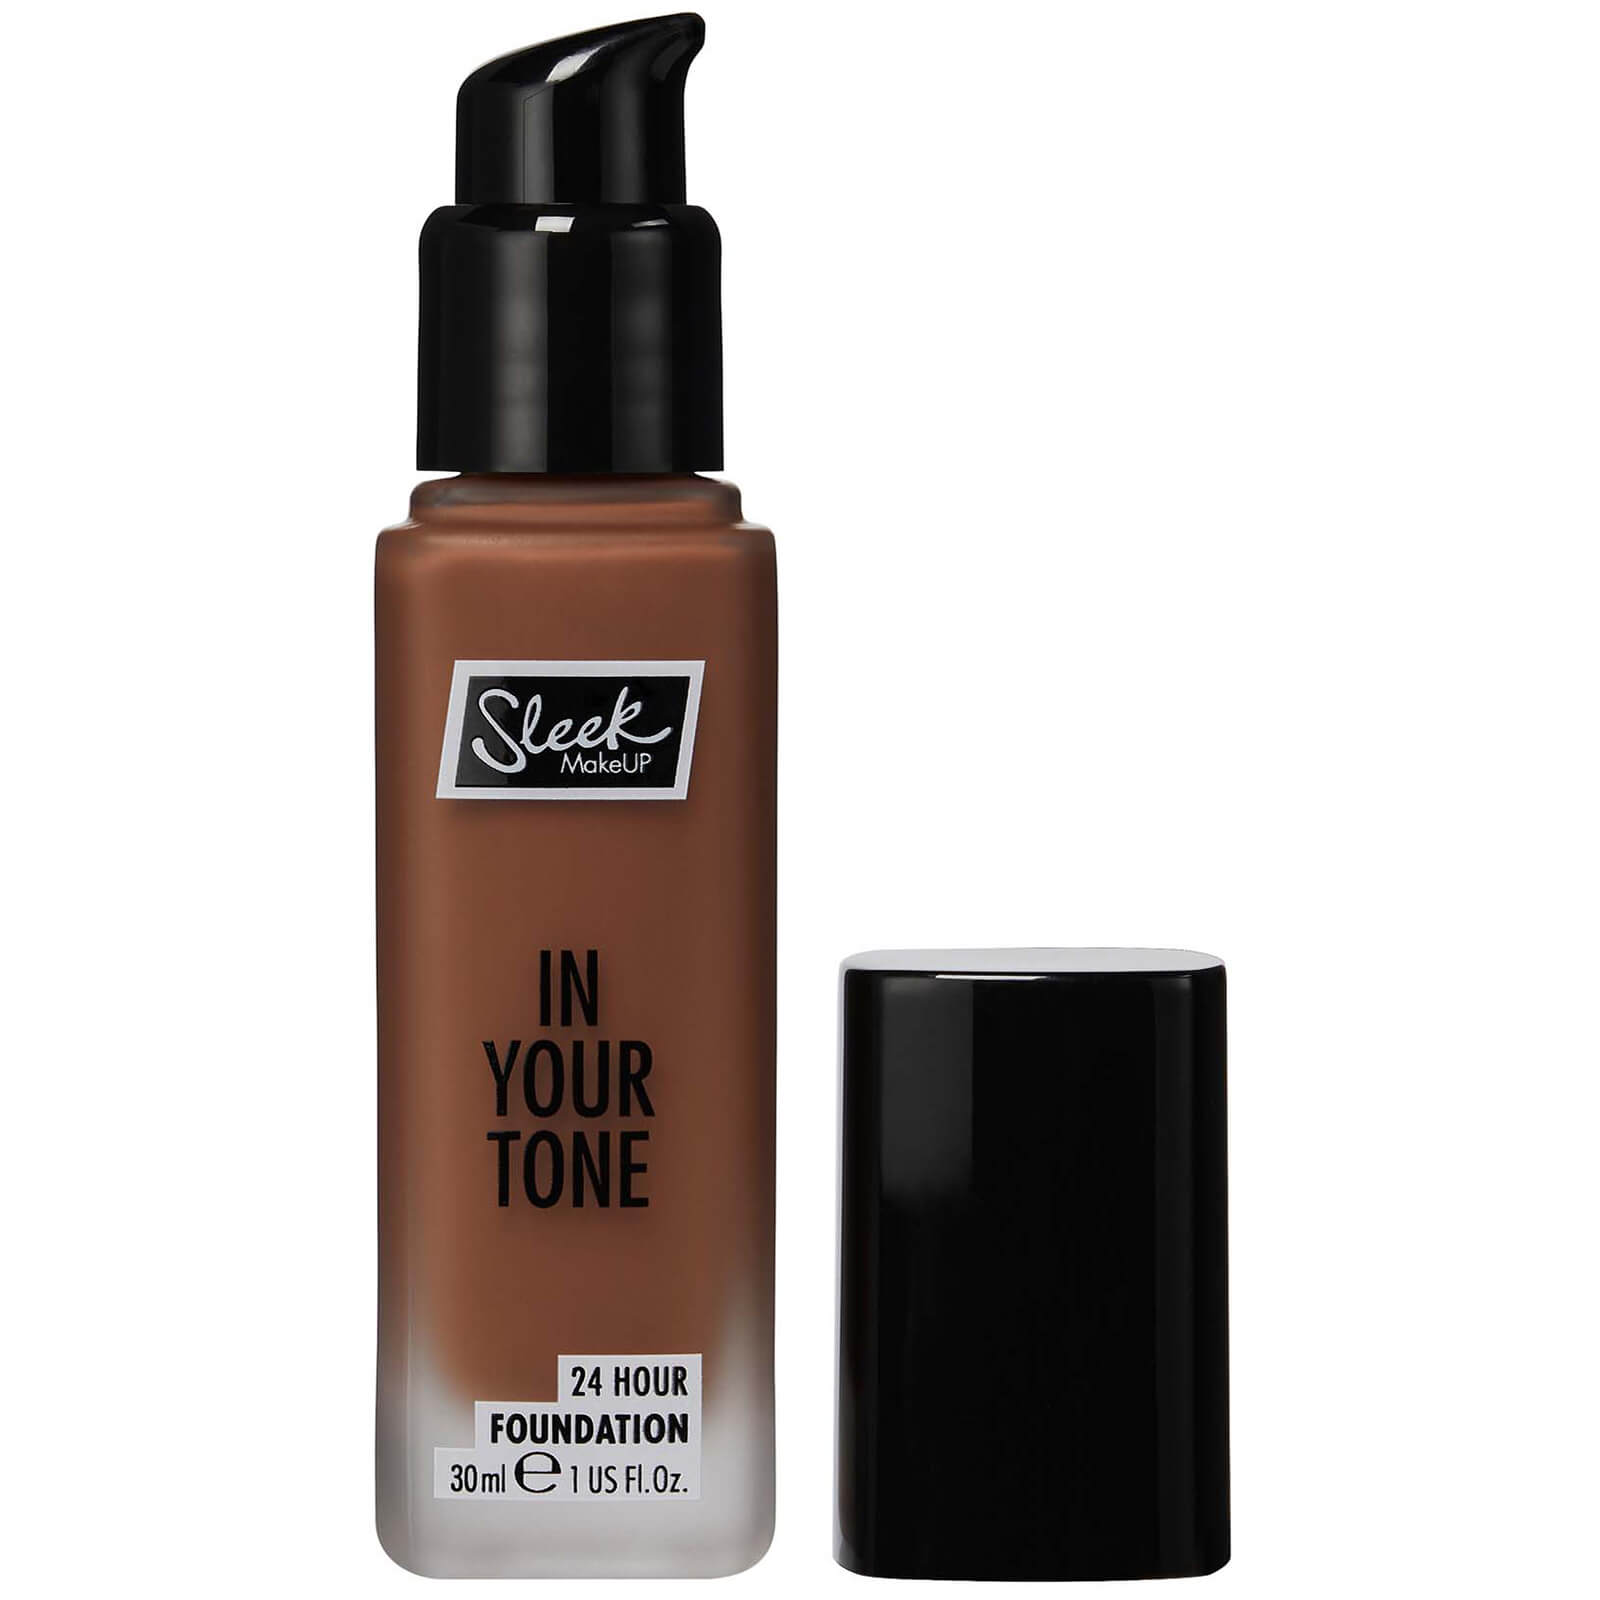 Sleek MakeUP in Your Tone 24 Hour Foundation 30ml (Various Shades) - 11C